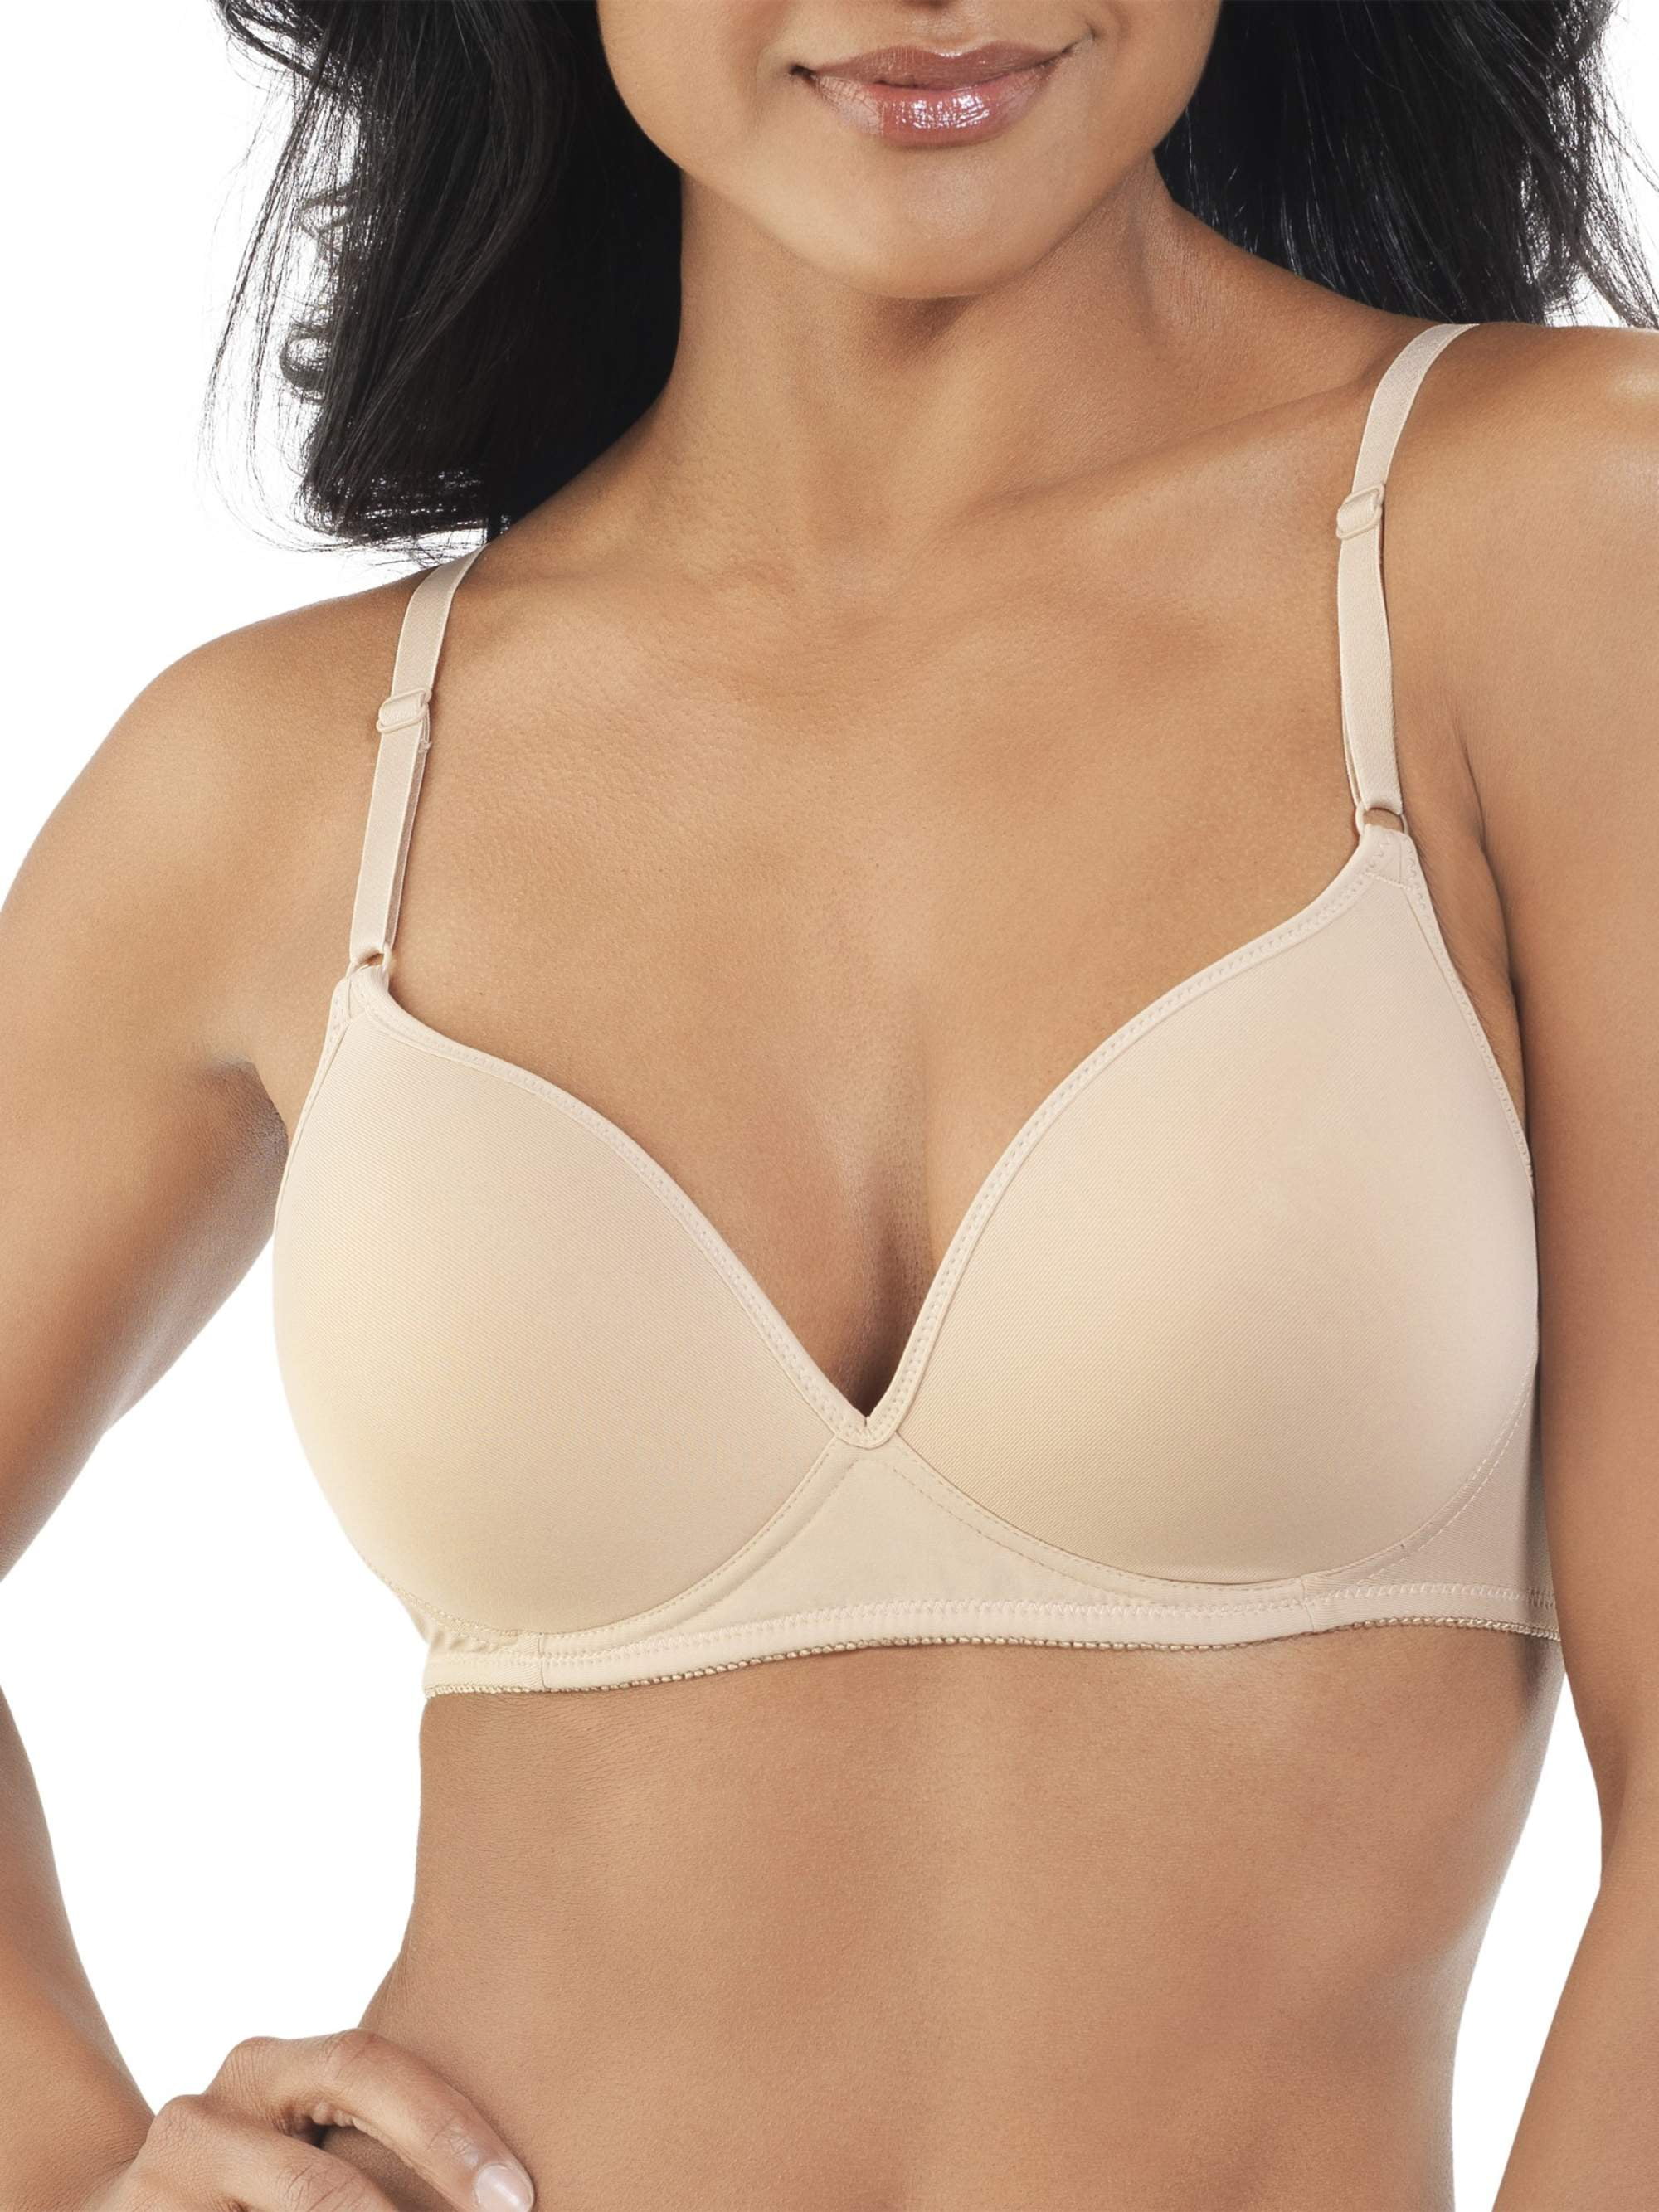 Buy Padded Non Wired Fashion T-Shirt Bra TS10 Online at Best